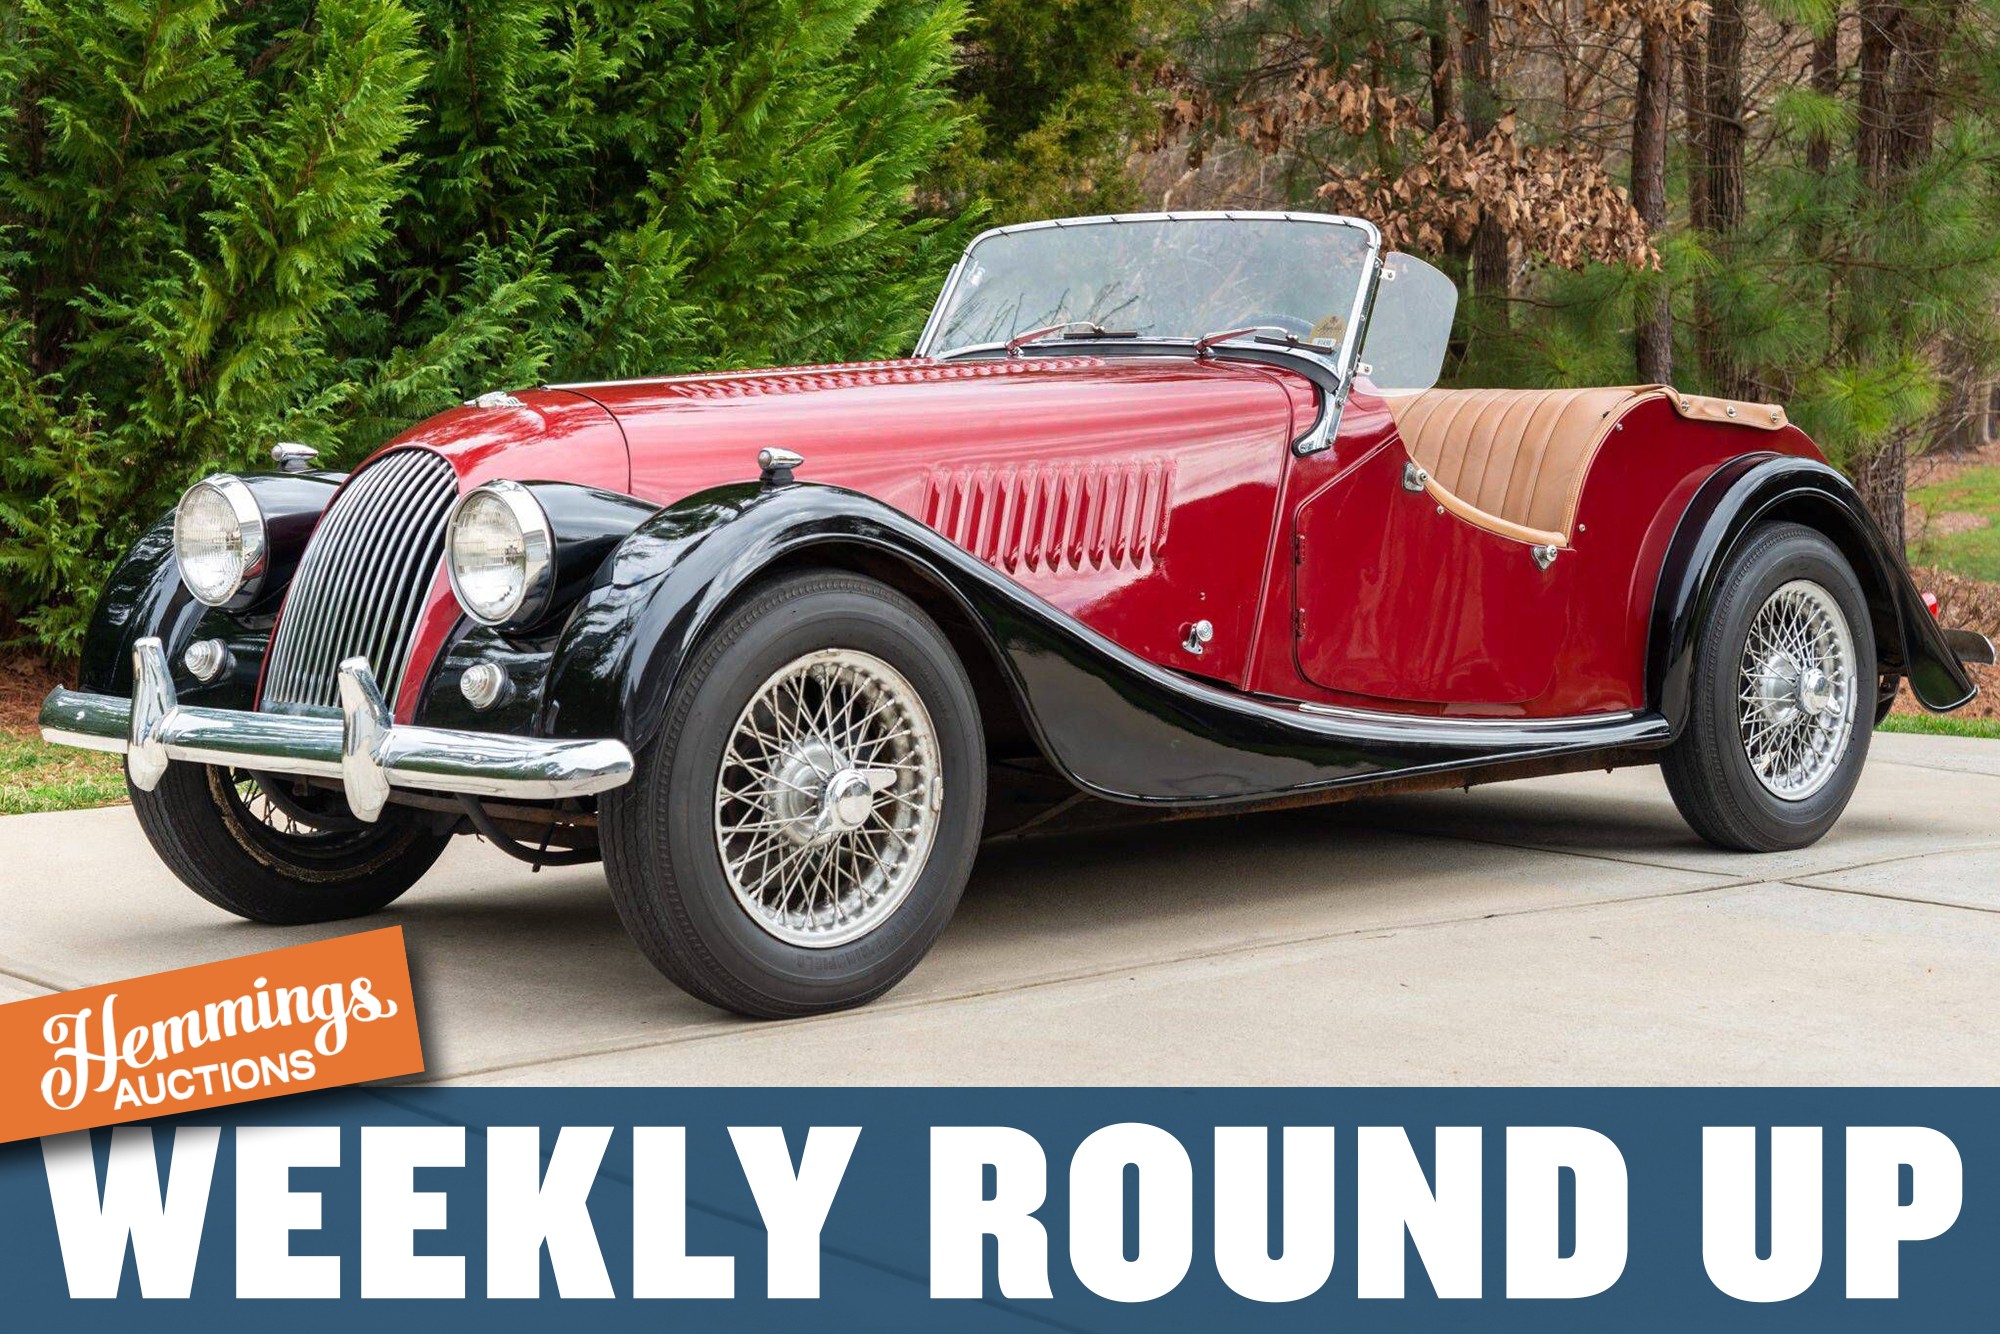 Hemmings Auctions Weekly Round Up:  1965 Morgan Plus 4, 2001 Dodge Viper RT/10, 1971 Ford F100 Sport Custom 4x4